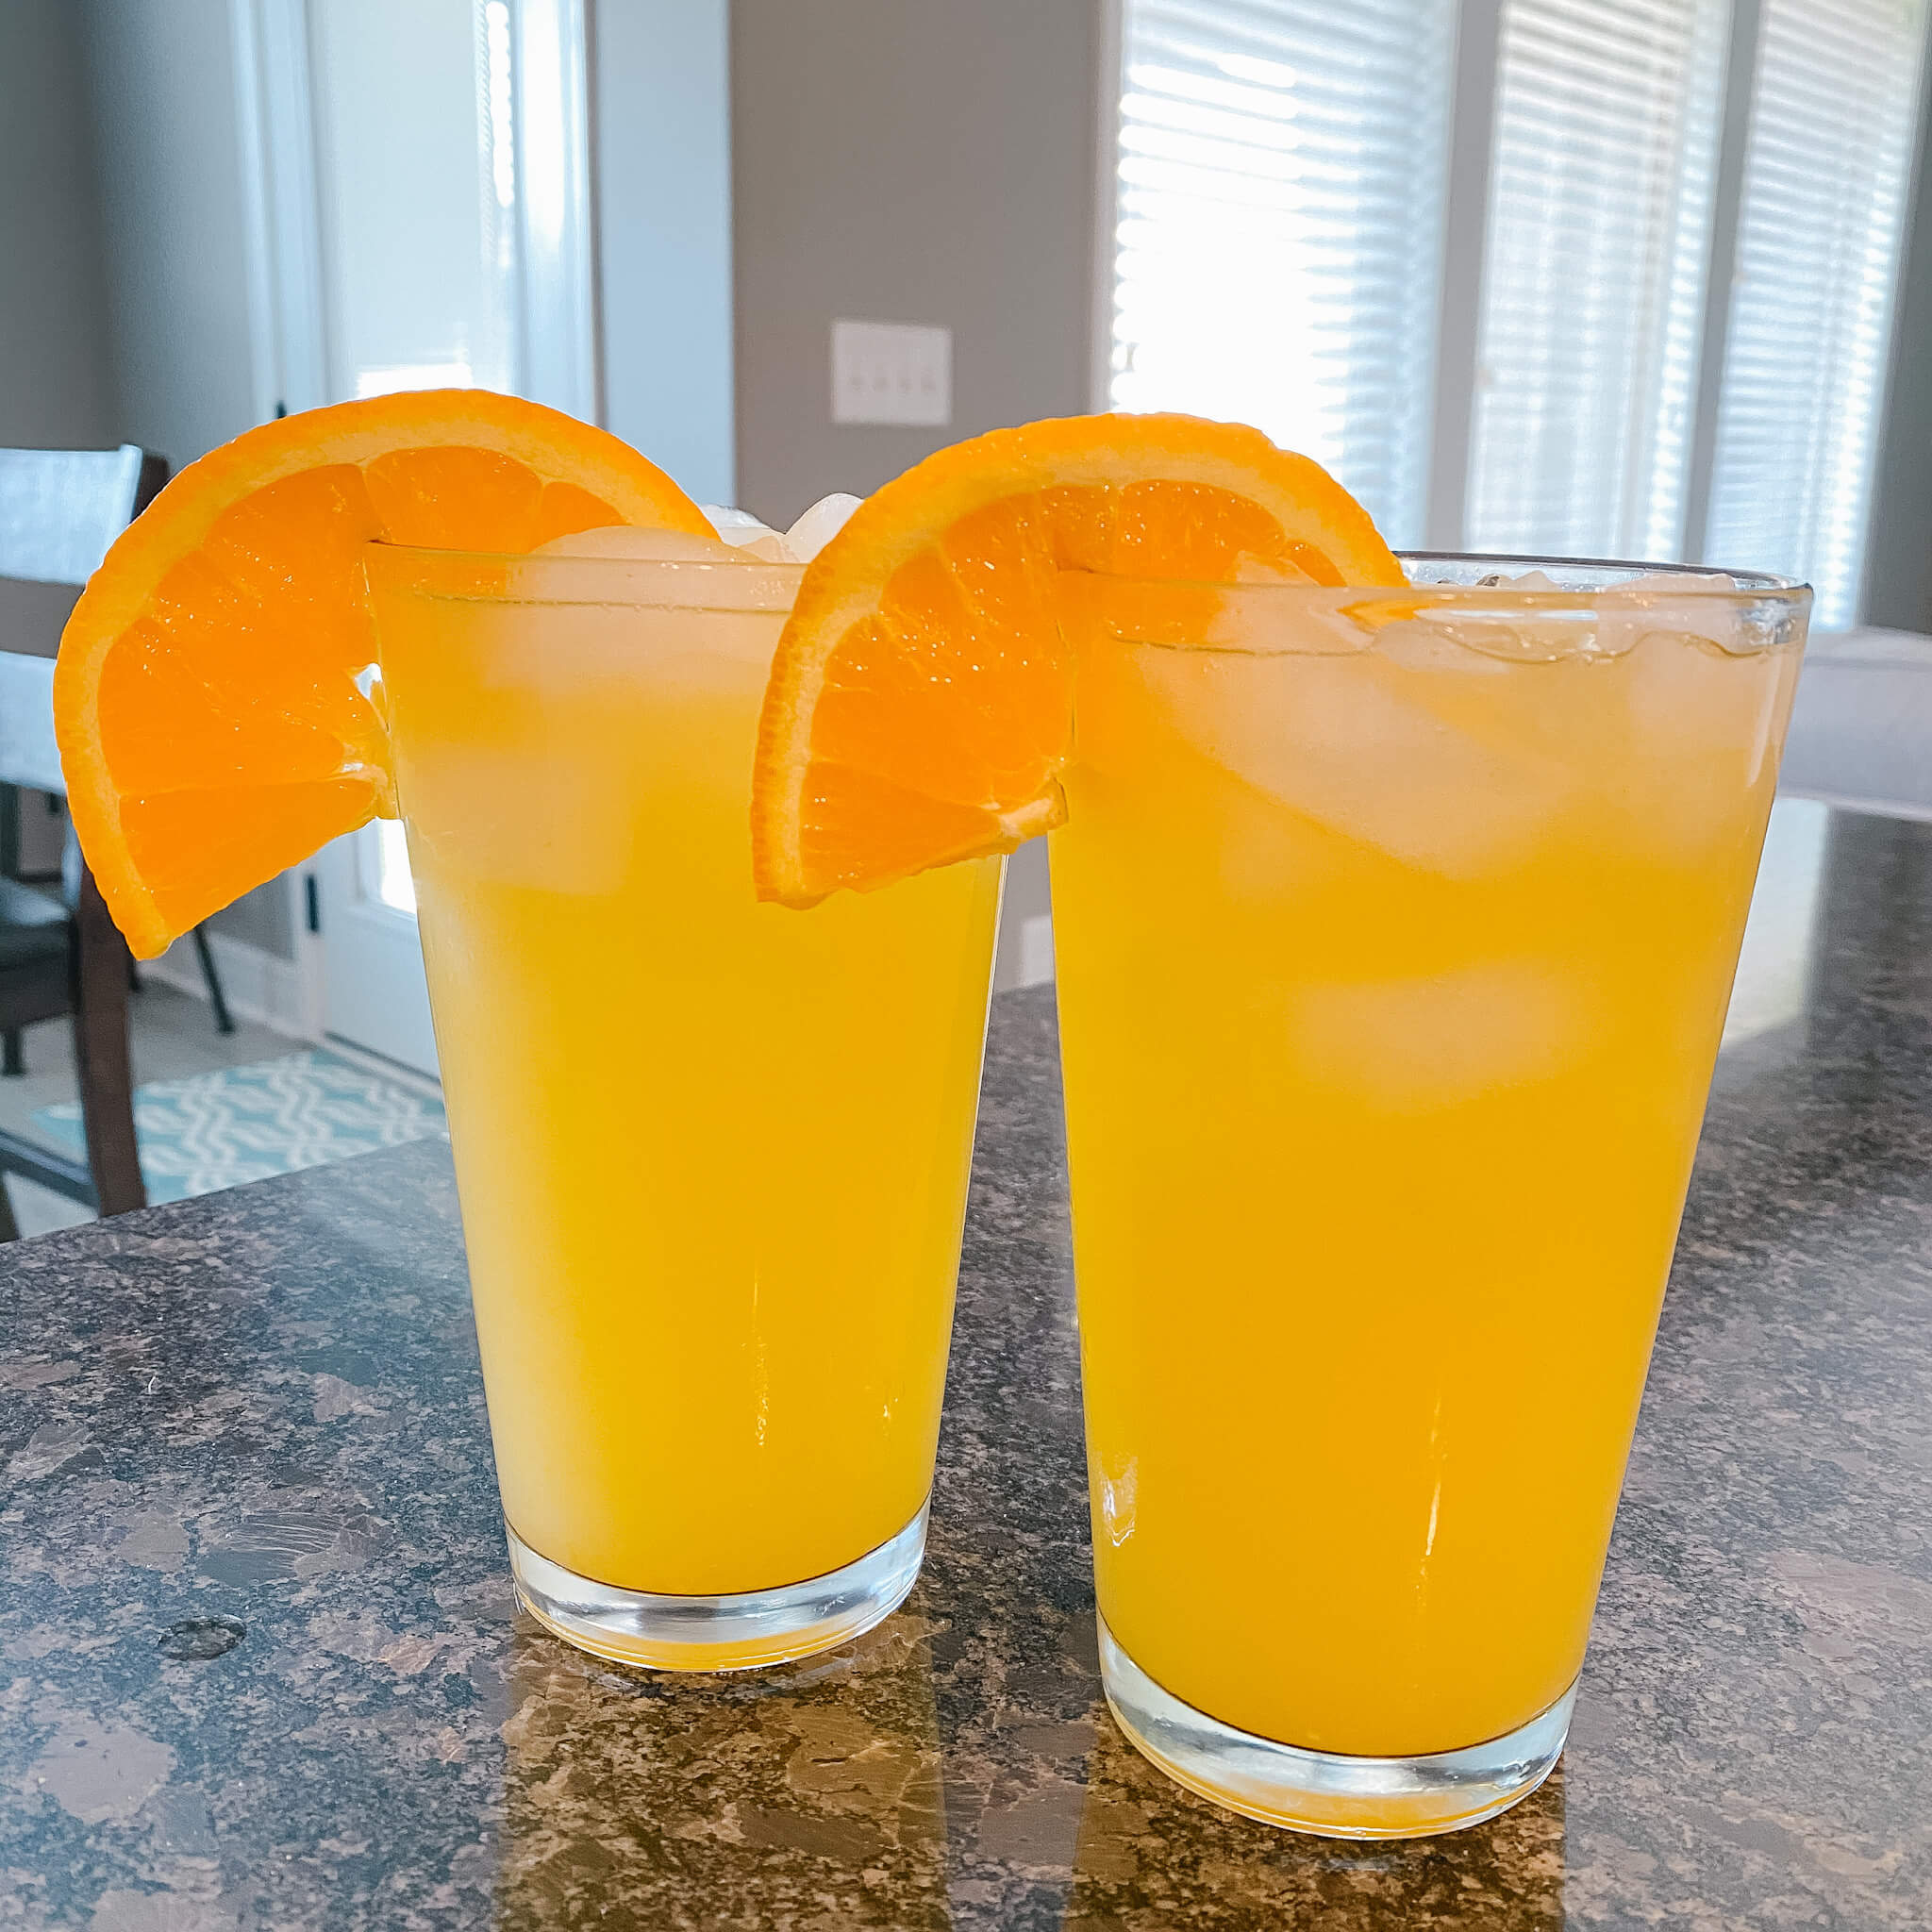 3 Delicious Summer Cocktails